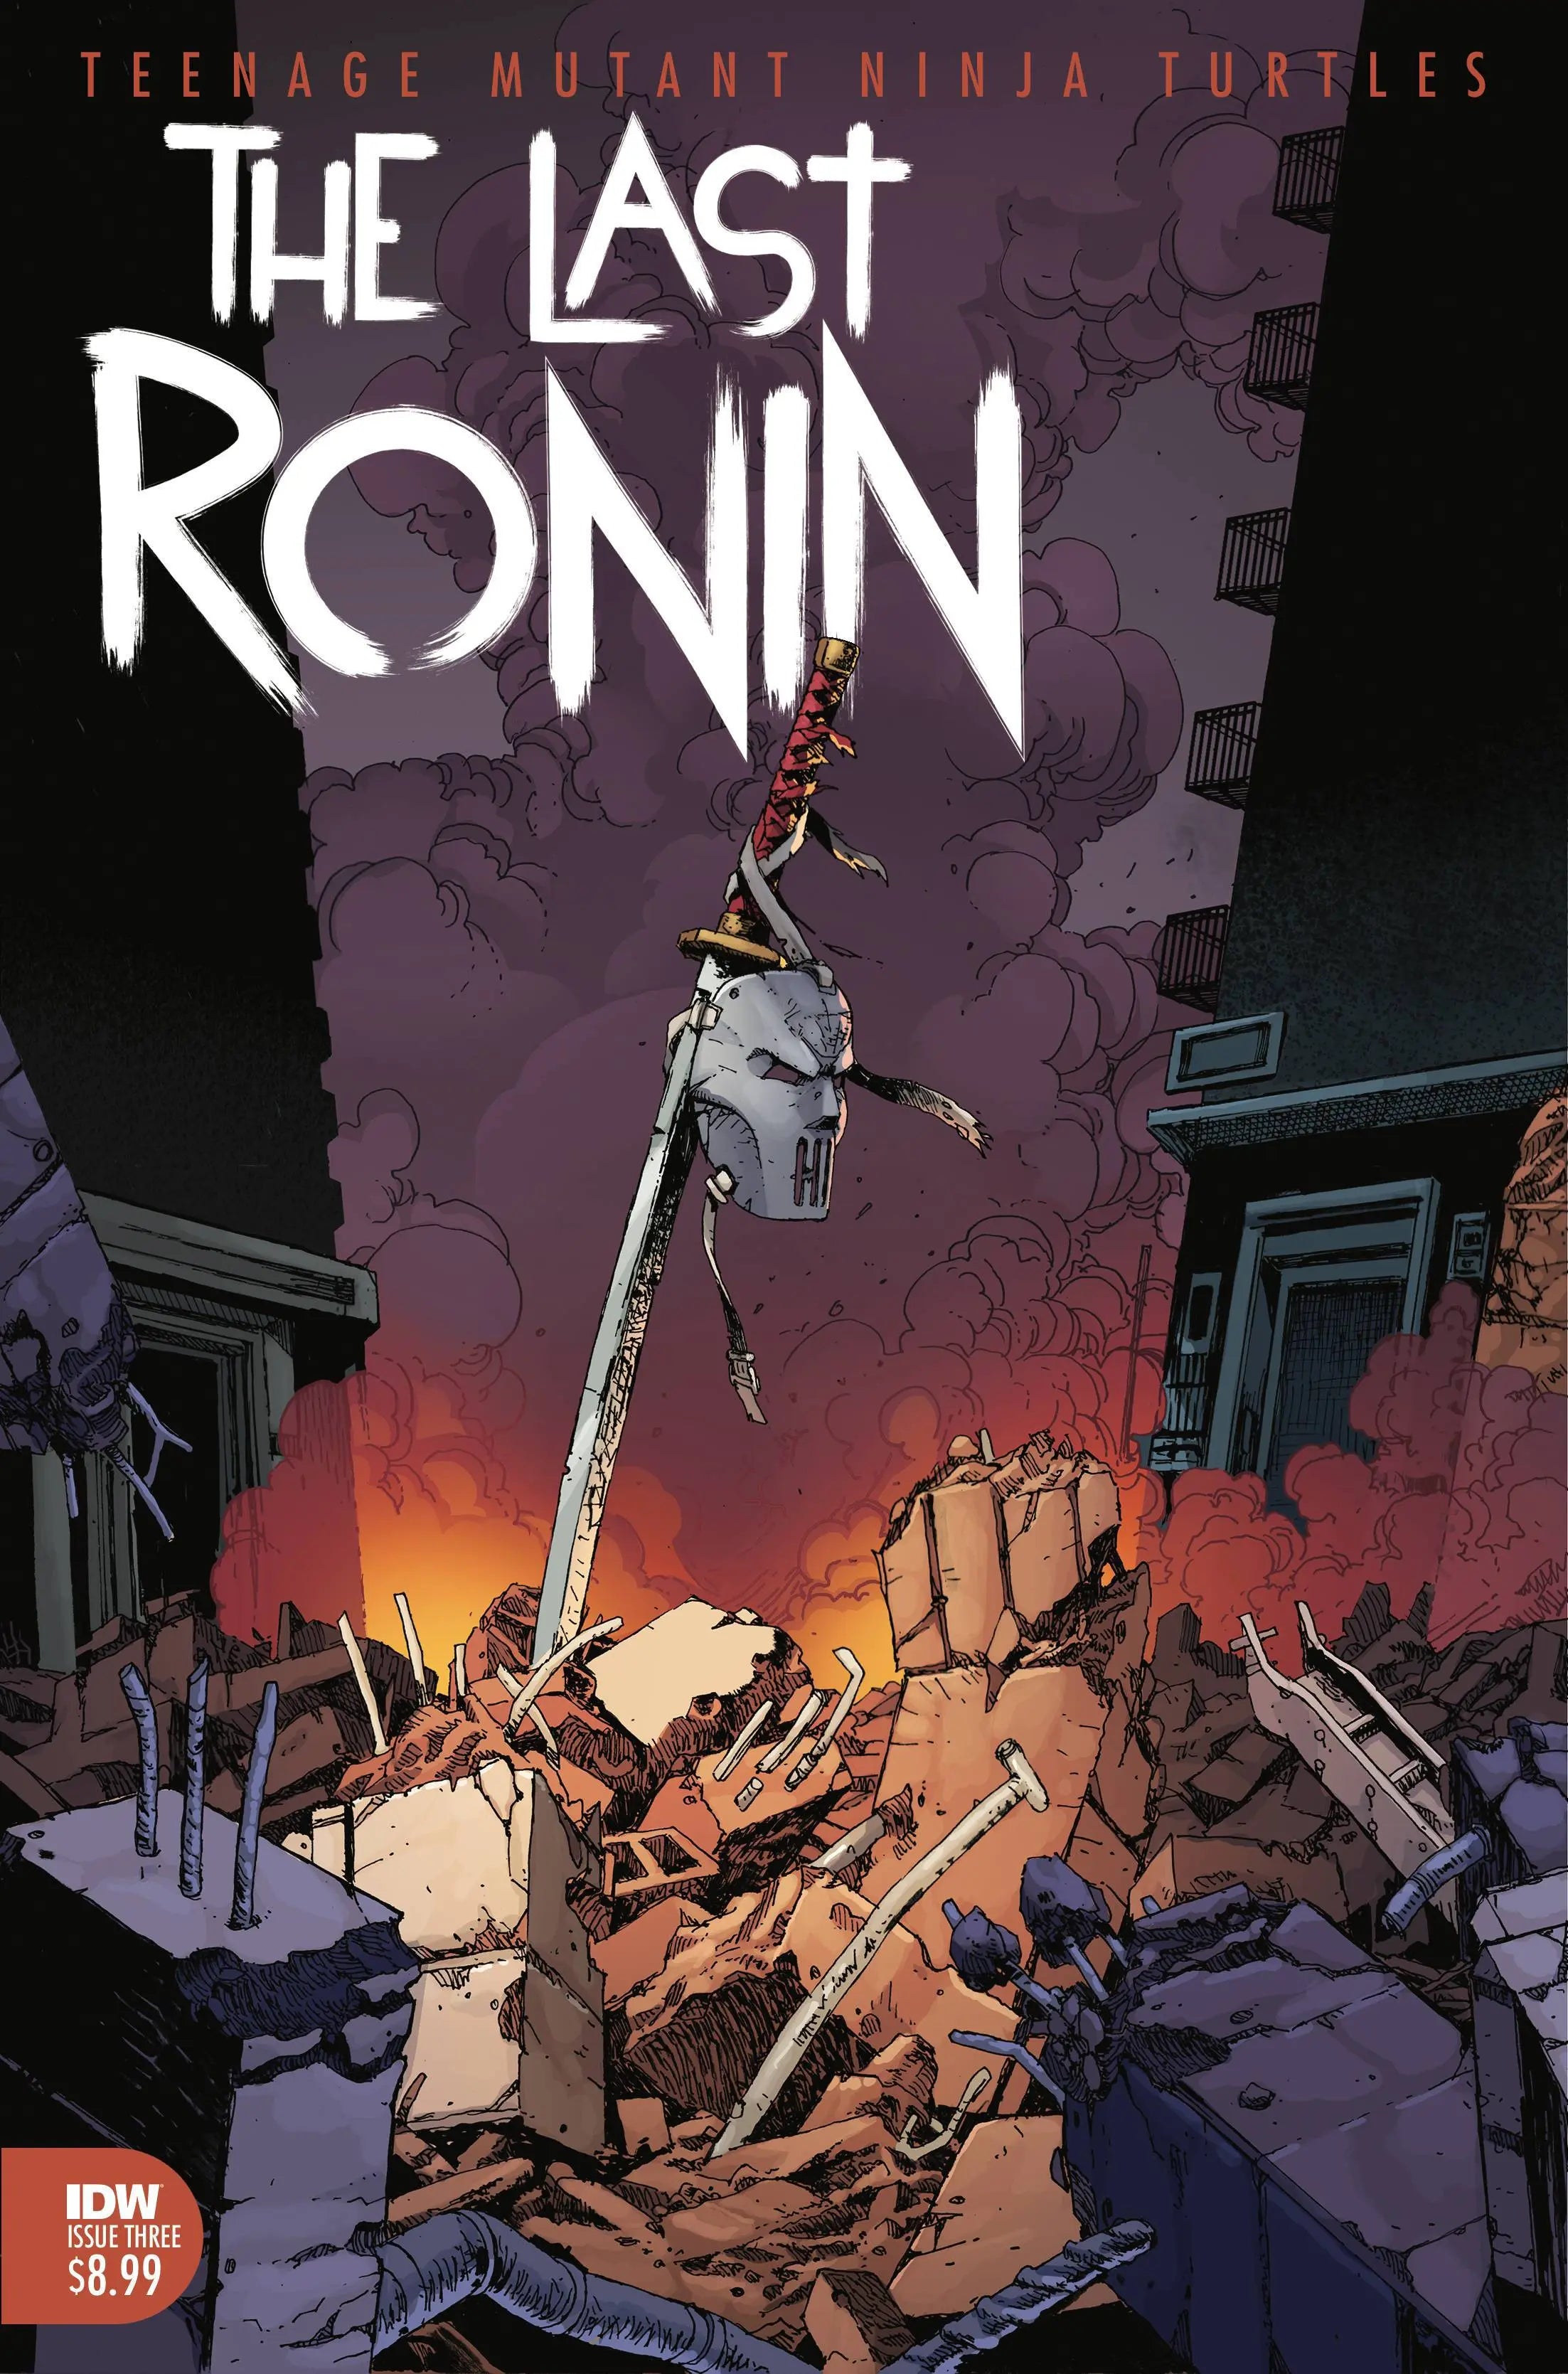 TMNT THE LAST RONIN #3 (OF 5) King Gaming